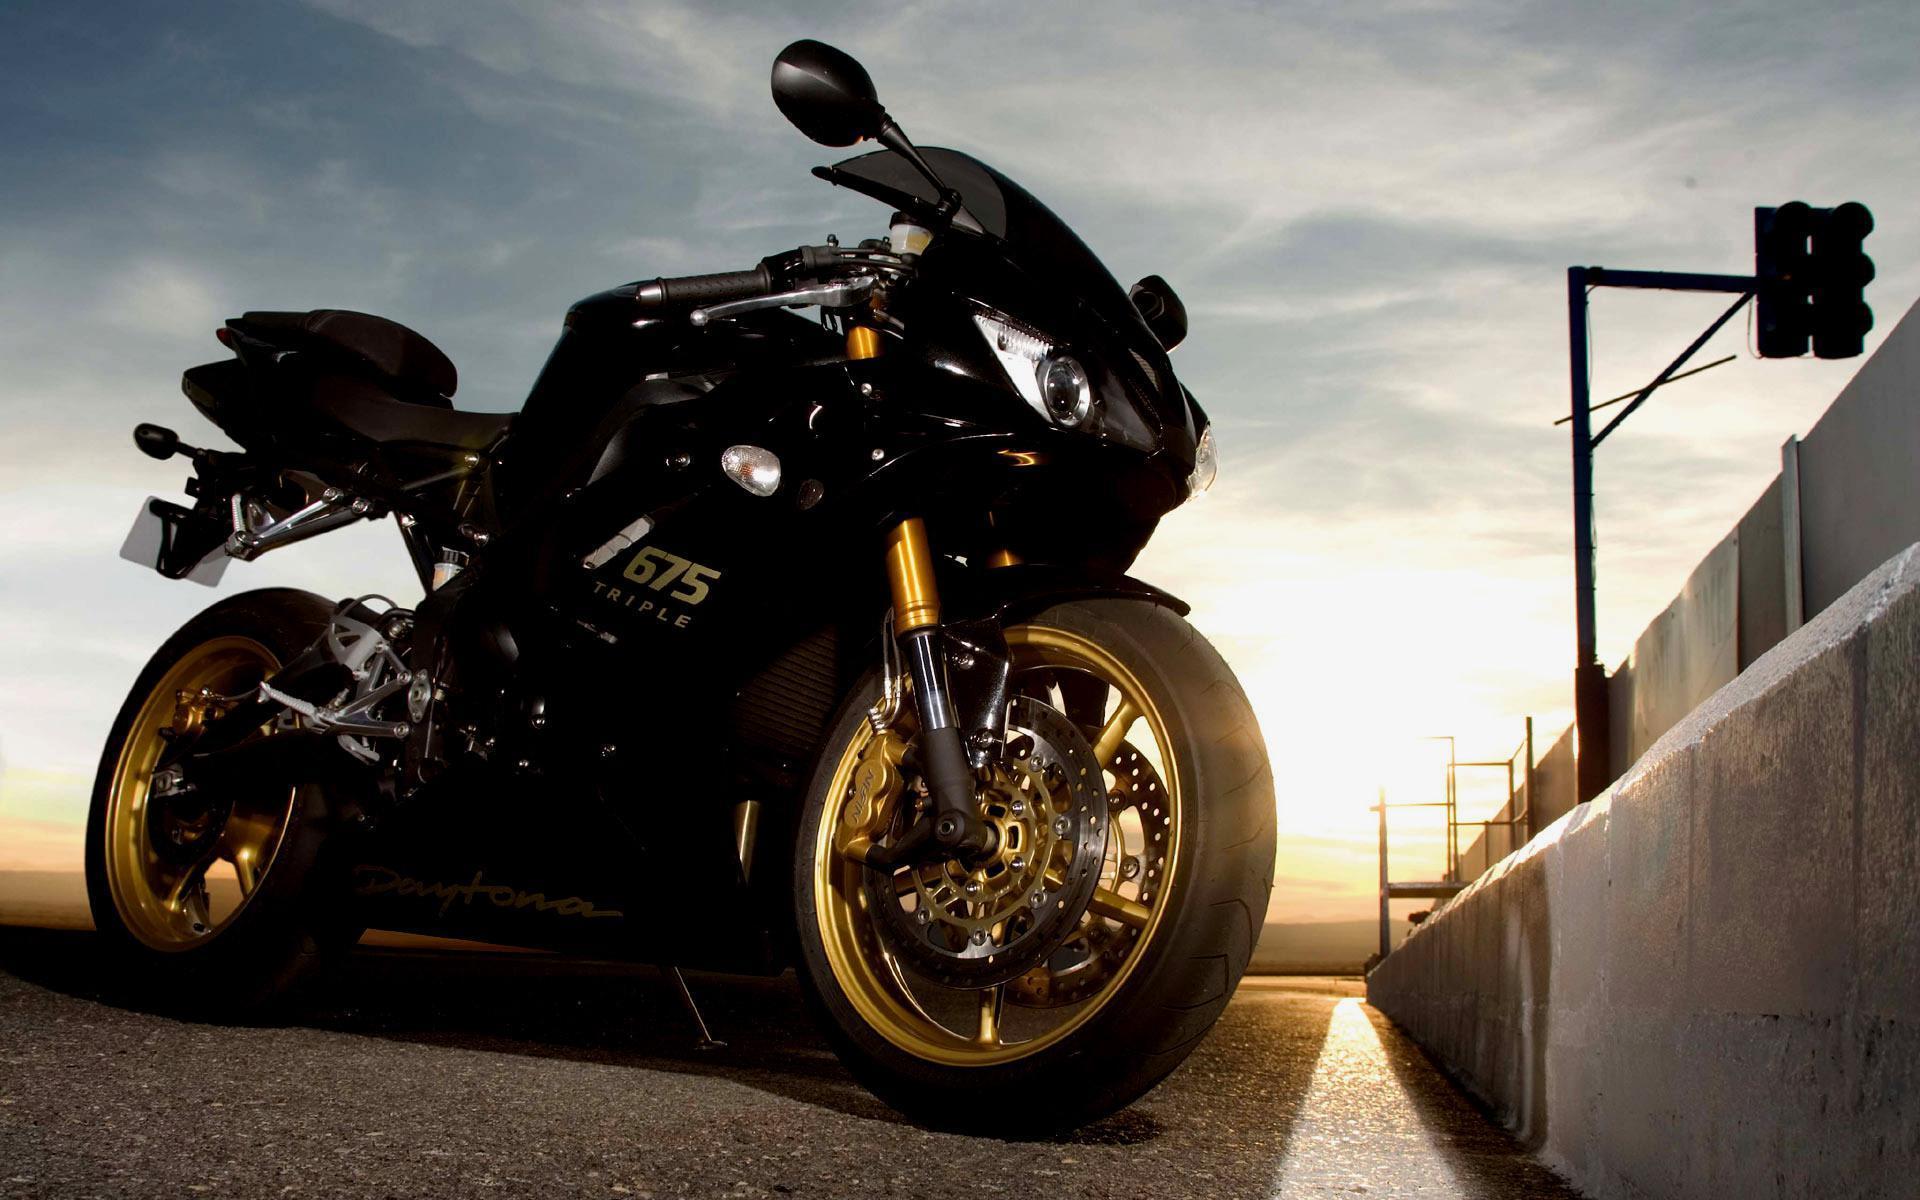 Download Triumph Motorcycles Wallpapers Widescreen 2 HD Wallpapers